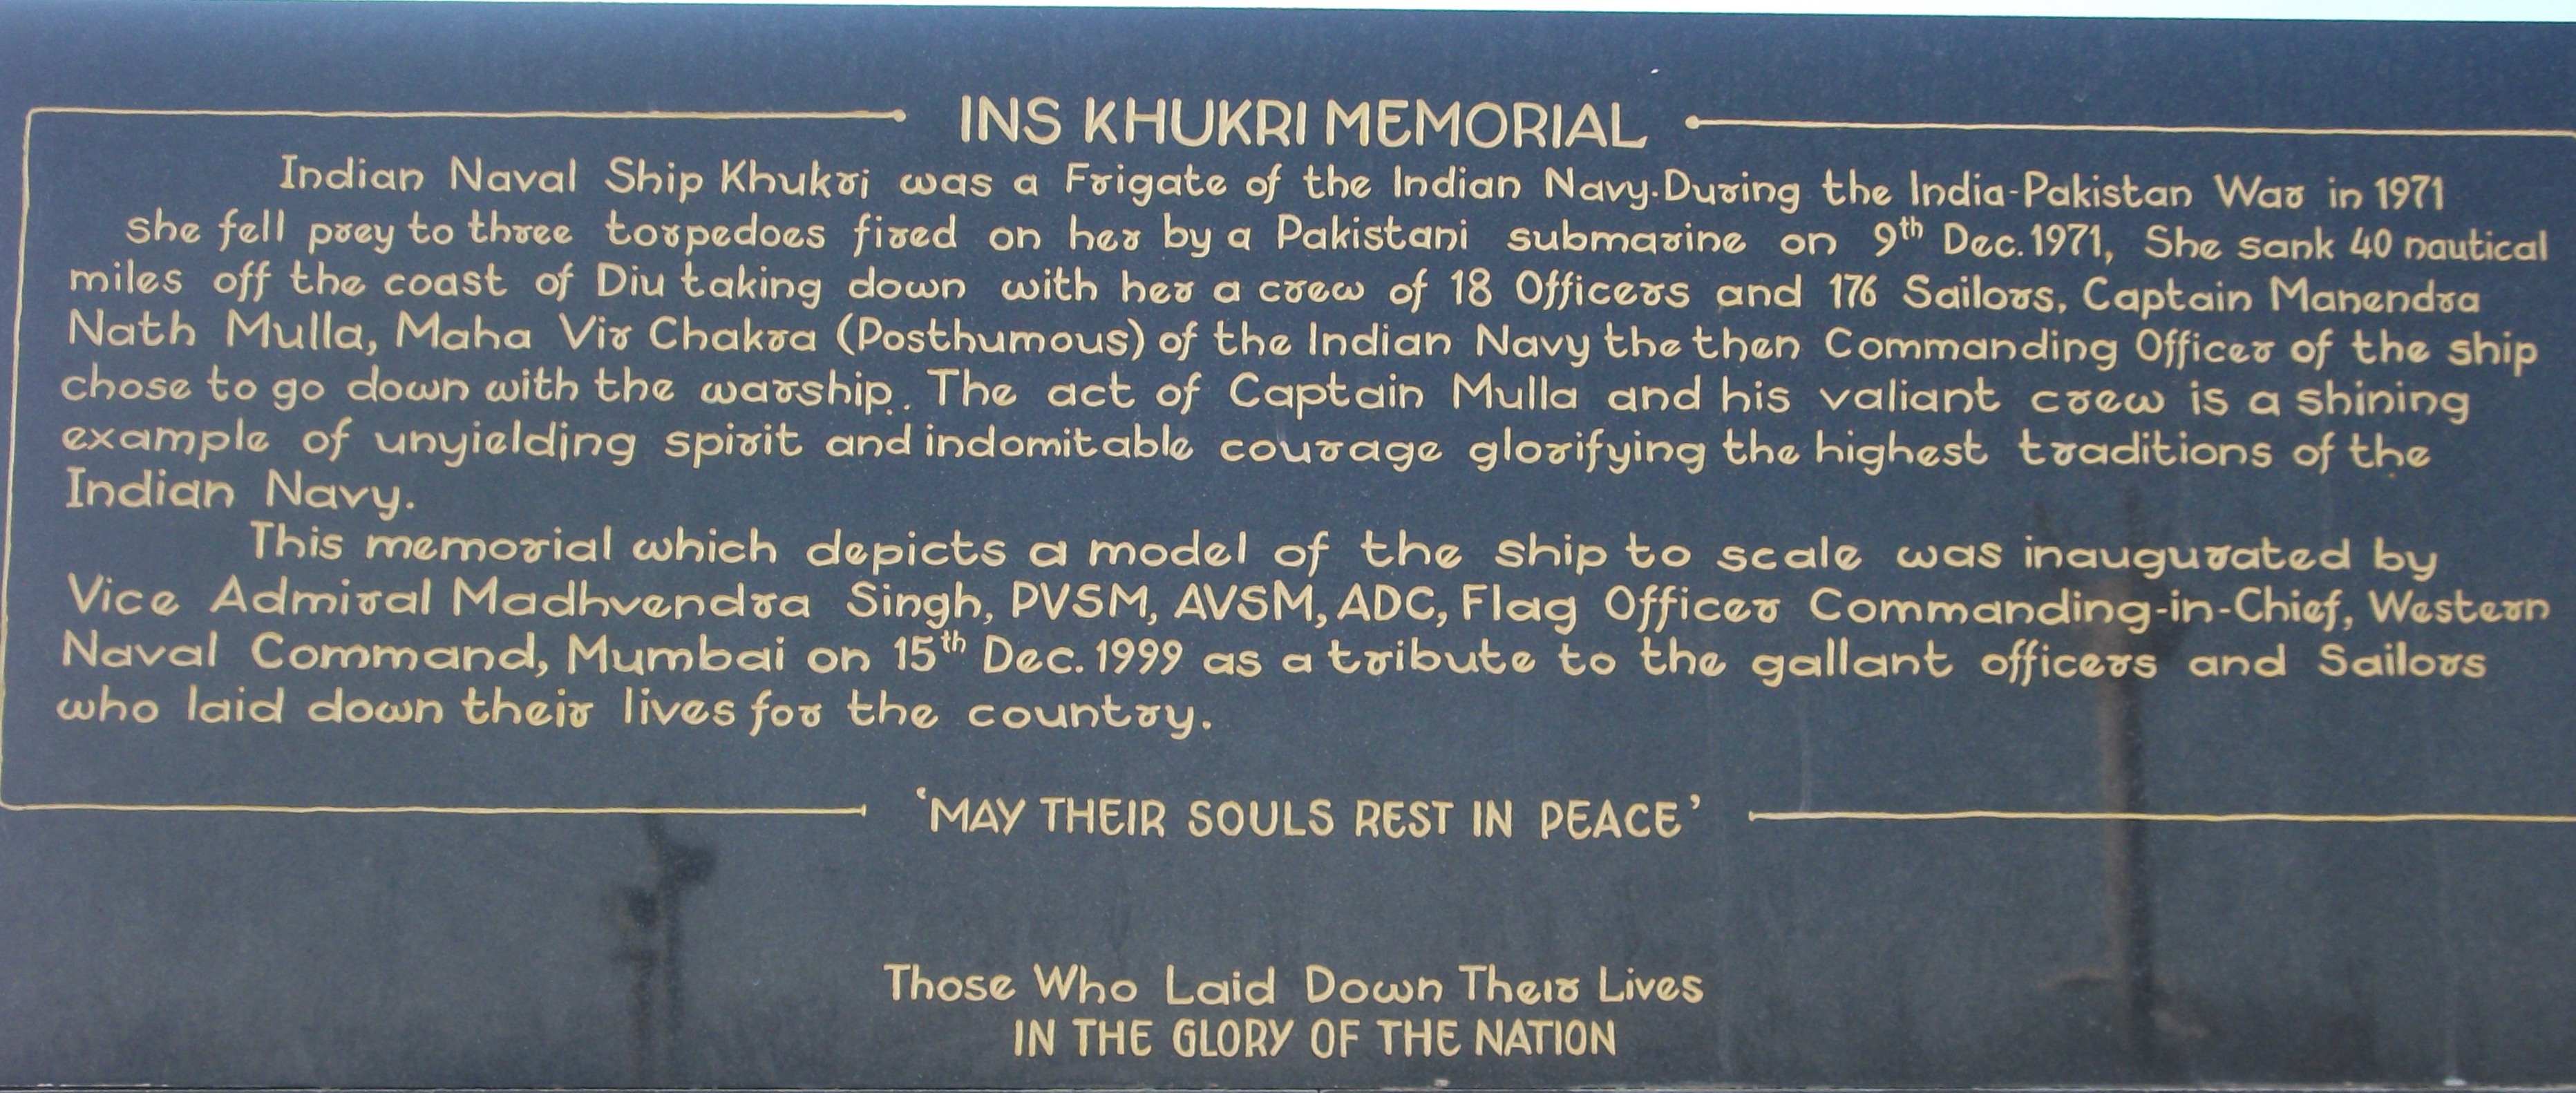 File:Engraved stone about INS Khukri at the ship's memorial.jpg - Wikimedia Commons